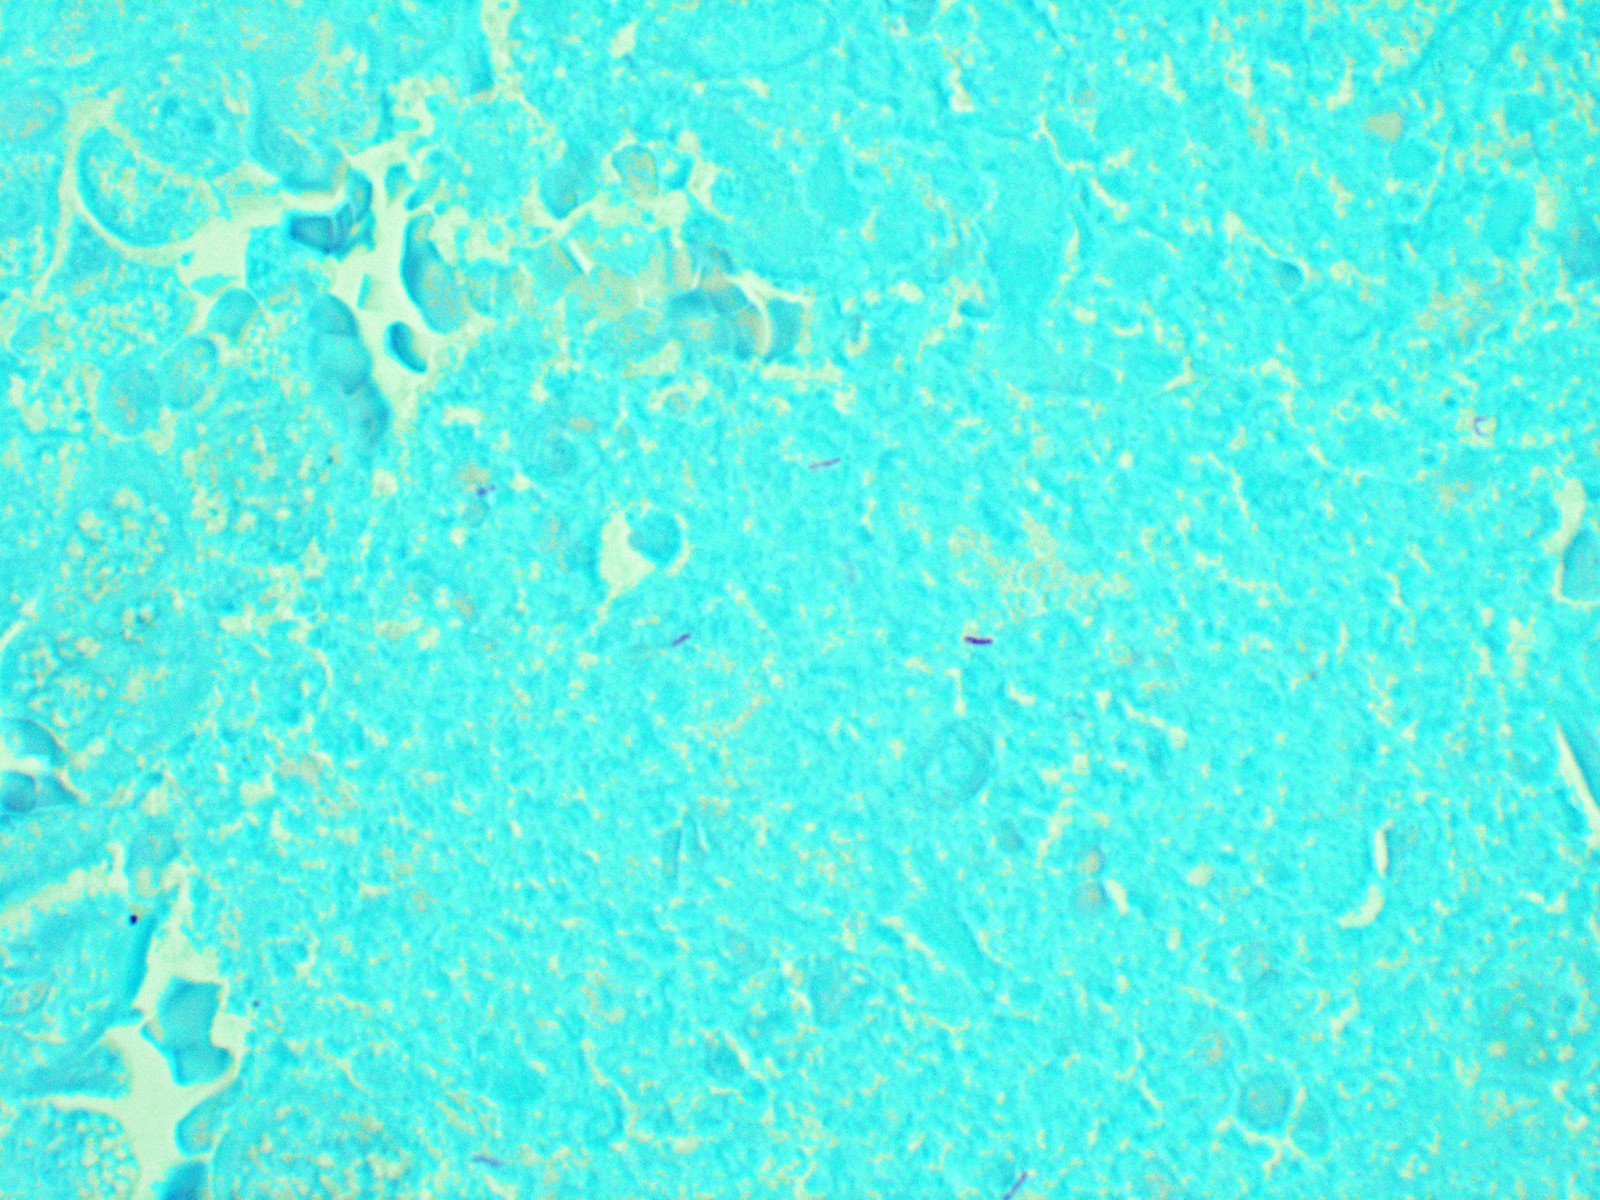 Positive AFB stain